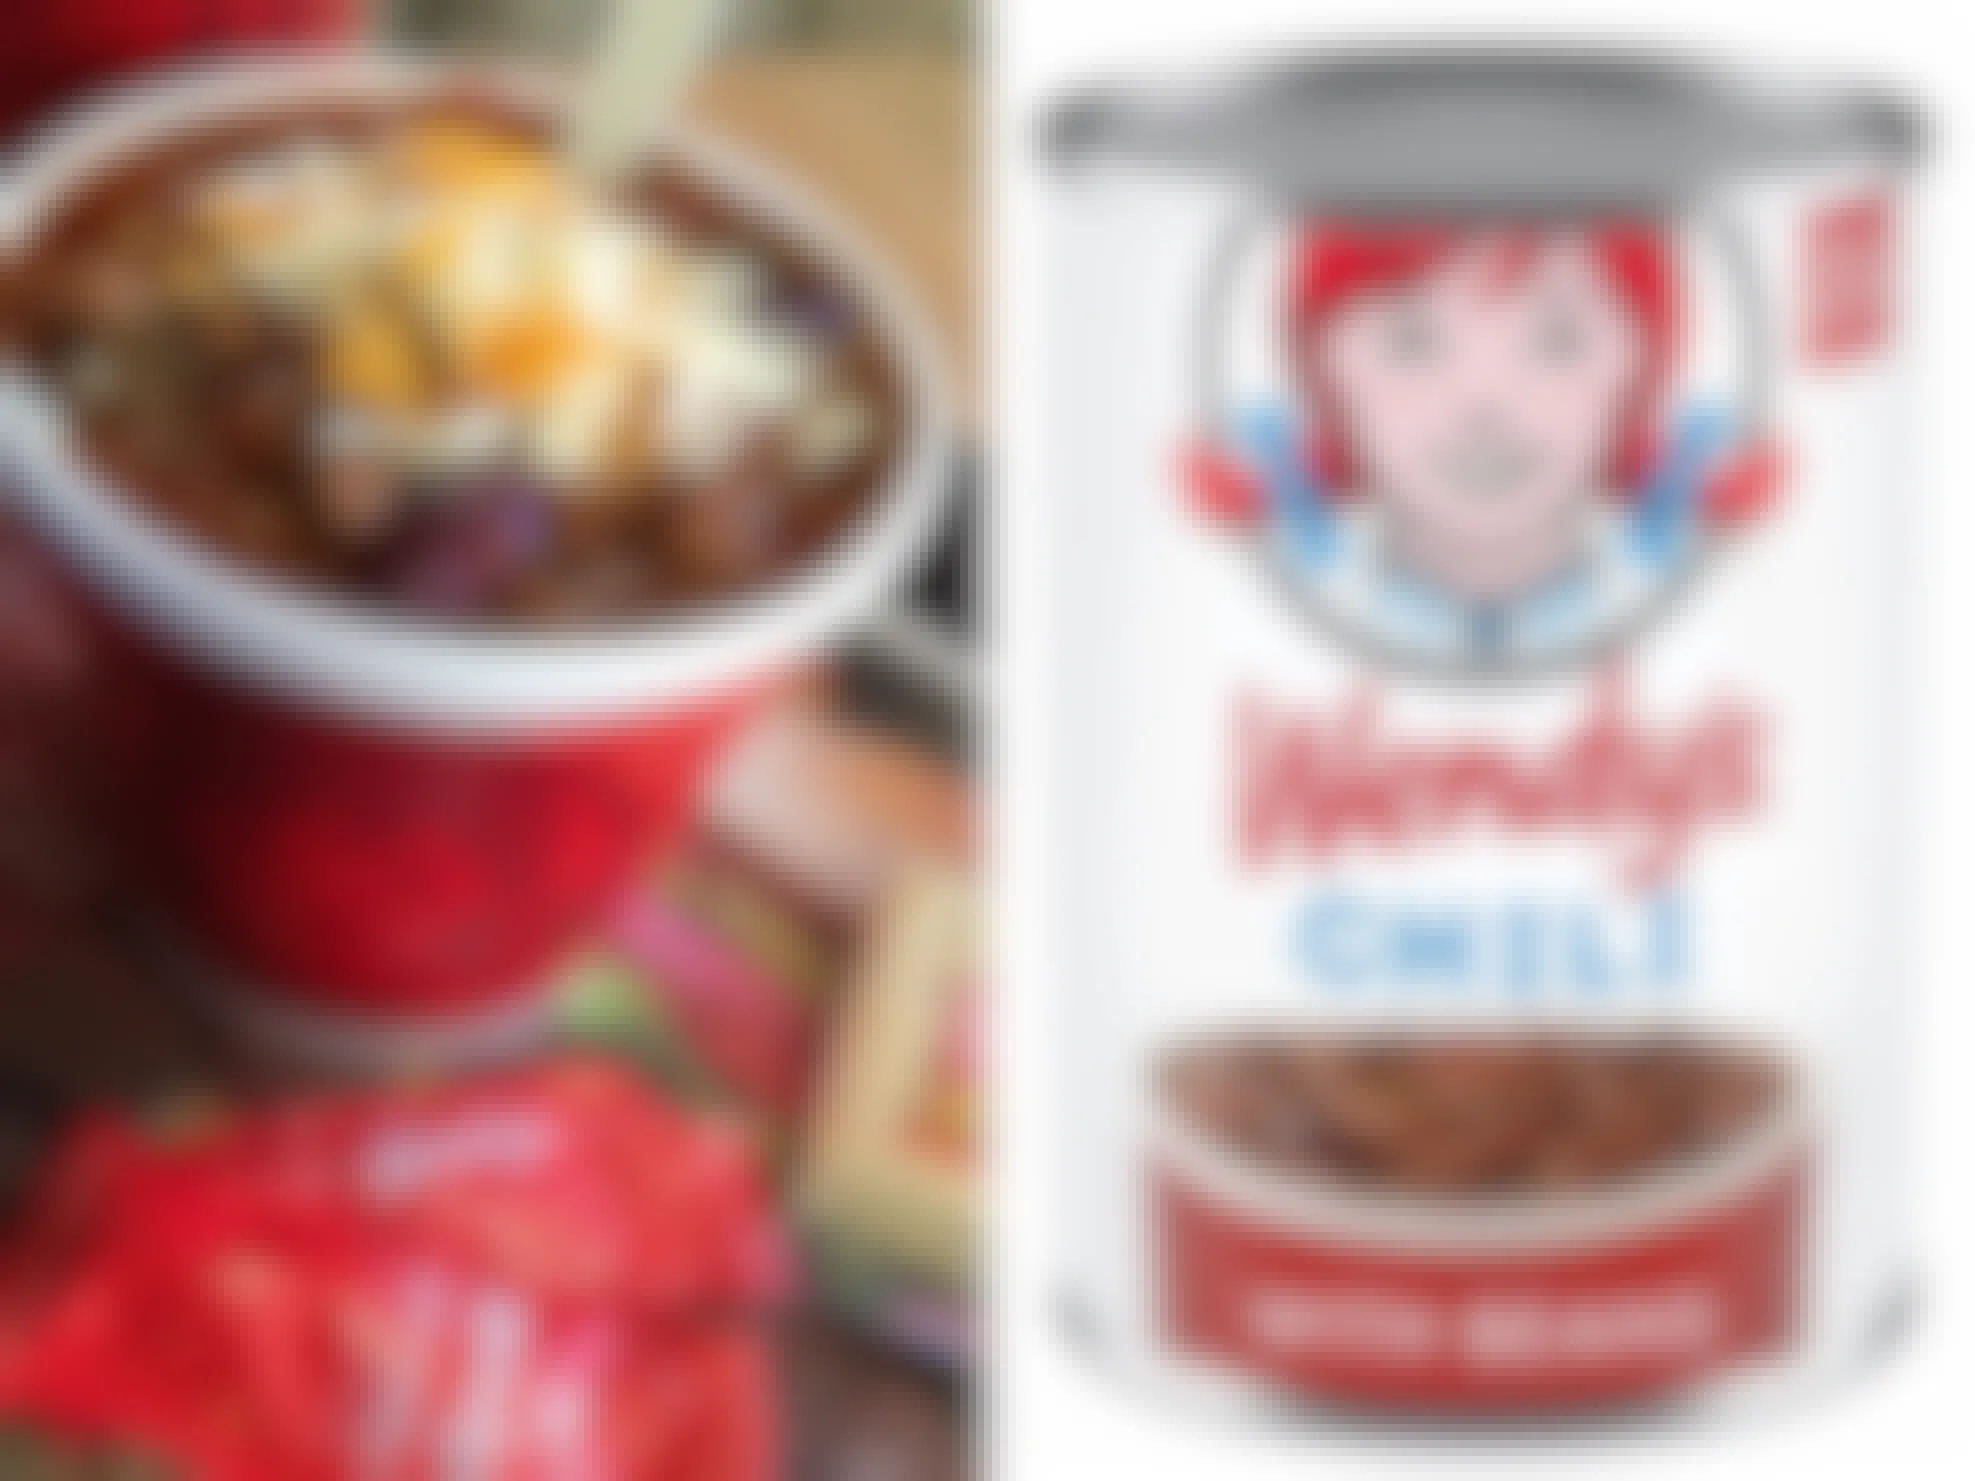 a side by side comparison of wendy's canned chili vs wendy's restaurant chili